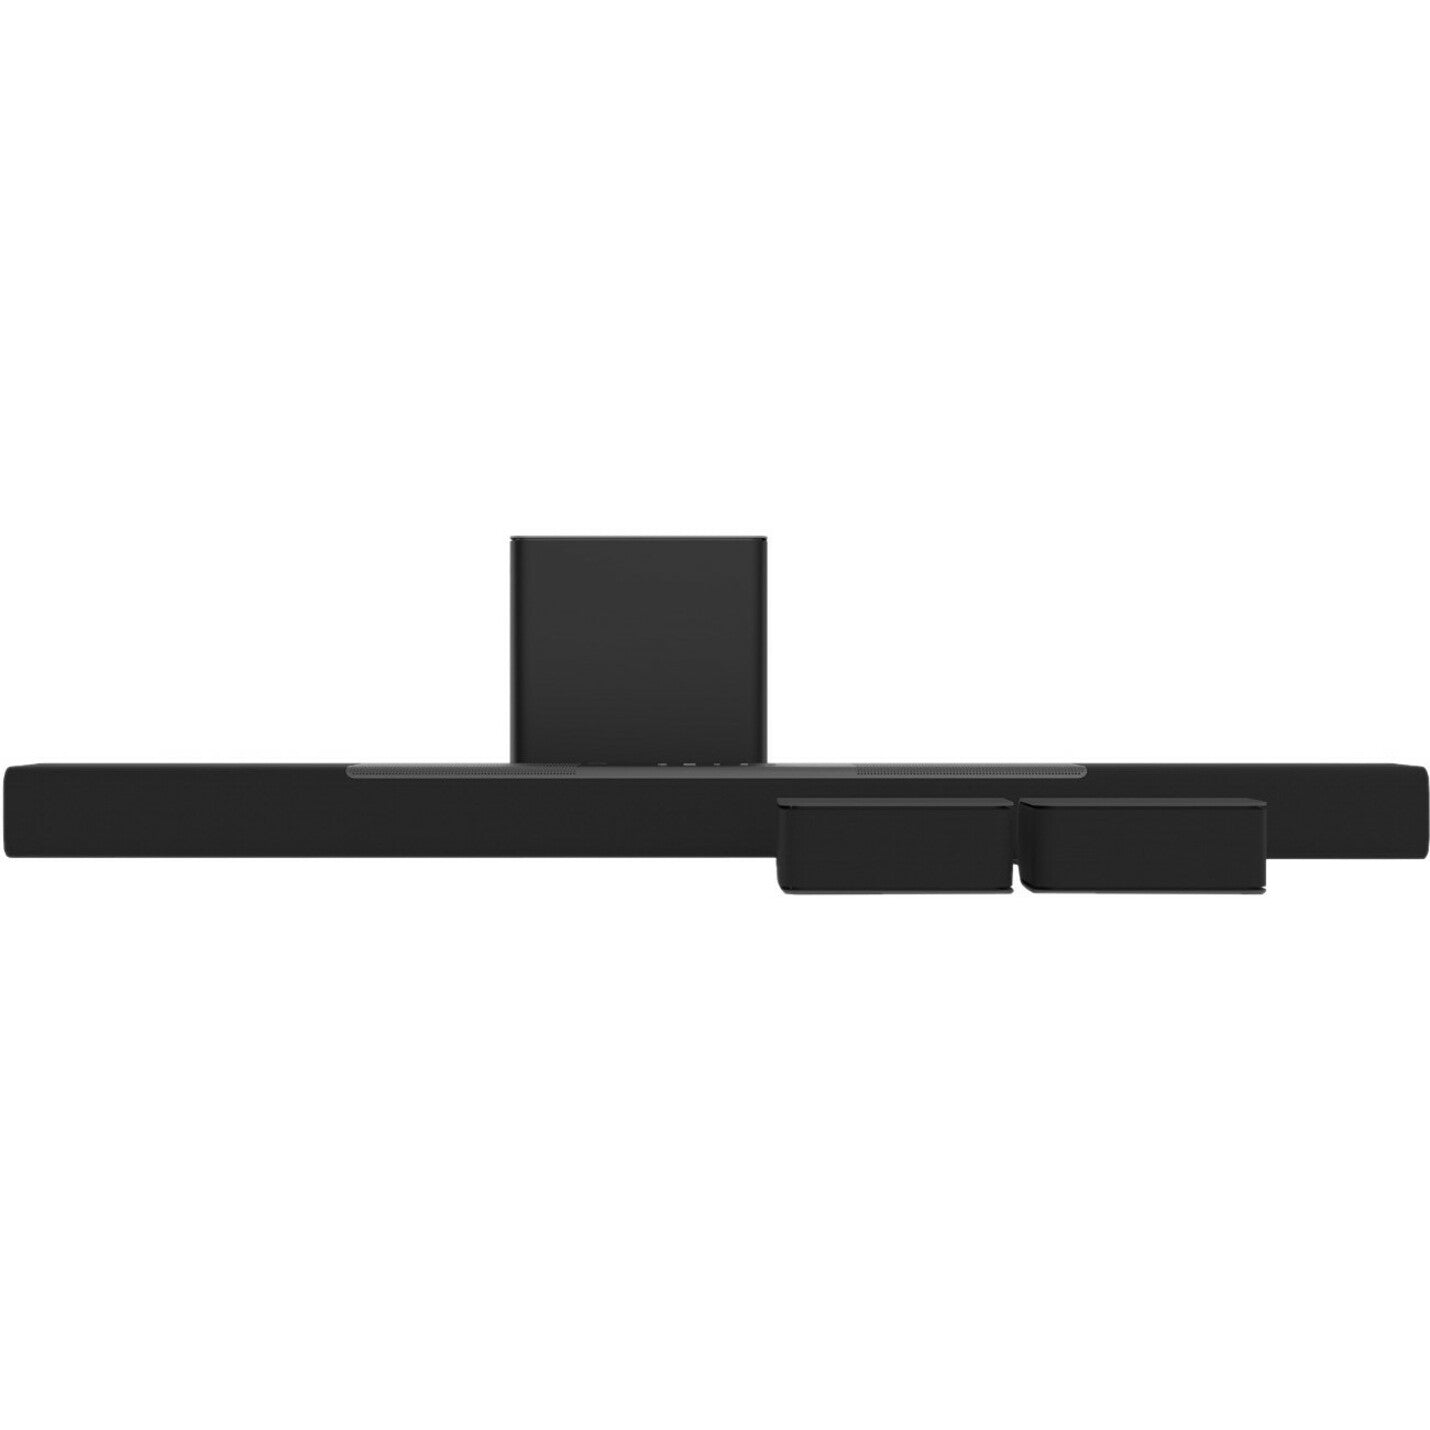 VIZIO M512A-H6 M512a-H6 5.1.2 Home Theater Sound Bar with Dolby Atmos and DTS:X, Wireless Subwoofer Connectivity, Remote Control, Spotify Connect